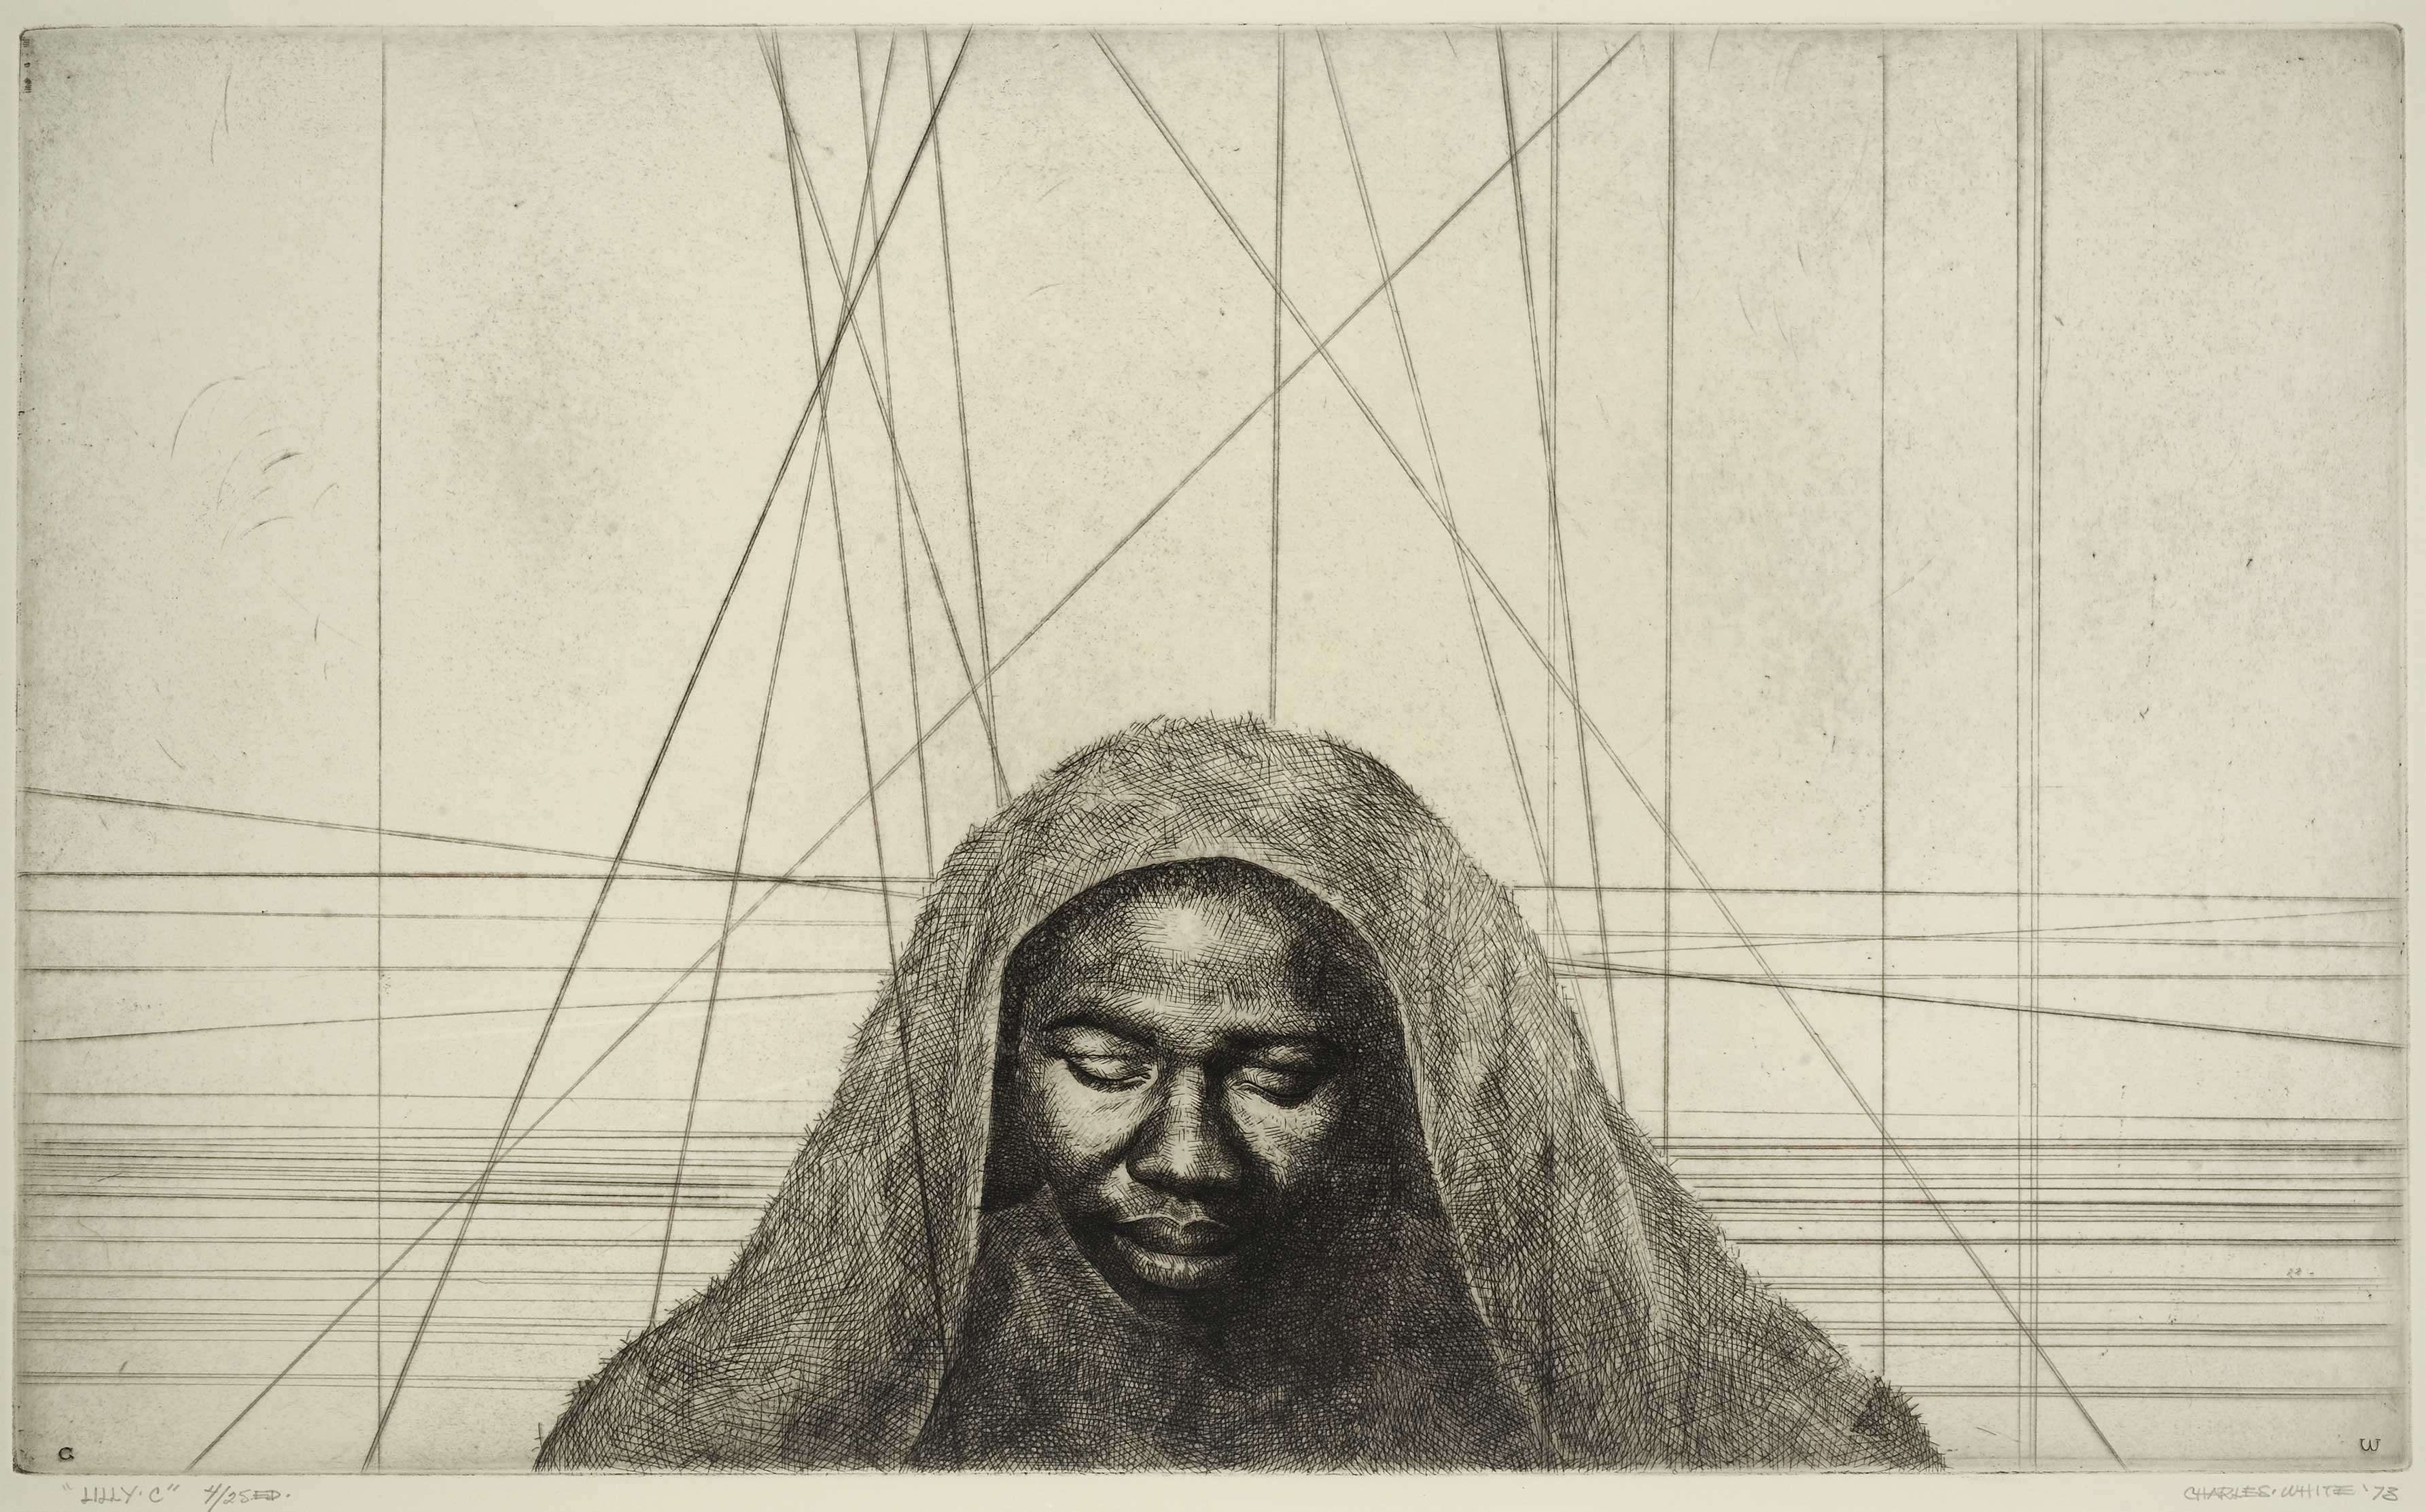 Charles White, Lily C., 1973, etching. Photo by Gregory Staley, © The Charles White Archives